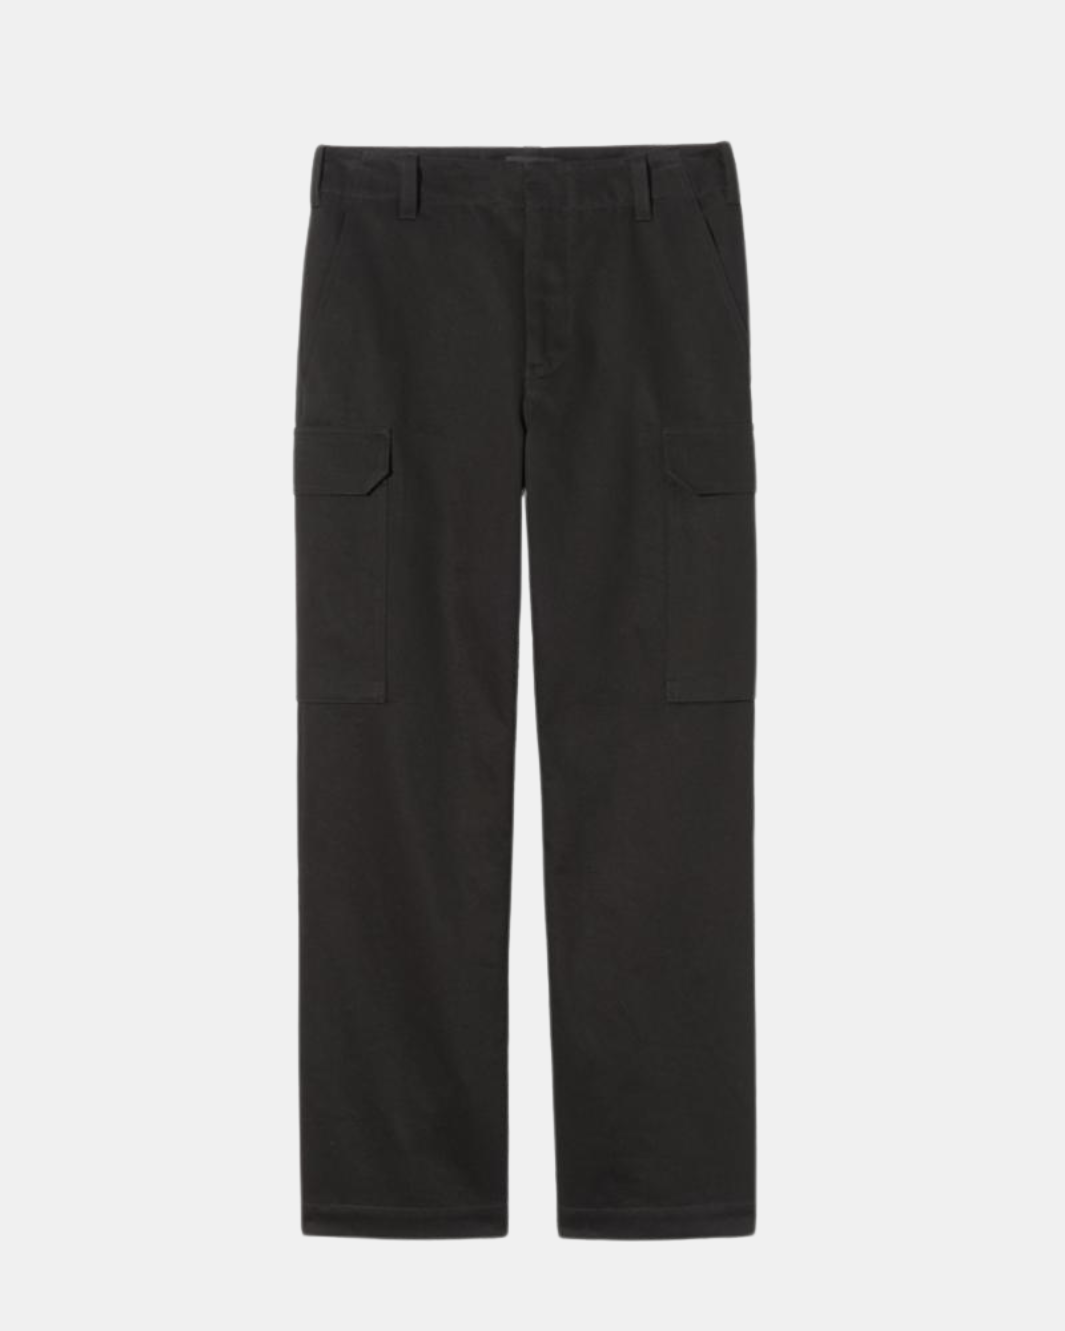 LEOFRED CARGO PANT IN MIDNIGHT - Romi Boutique